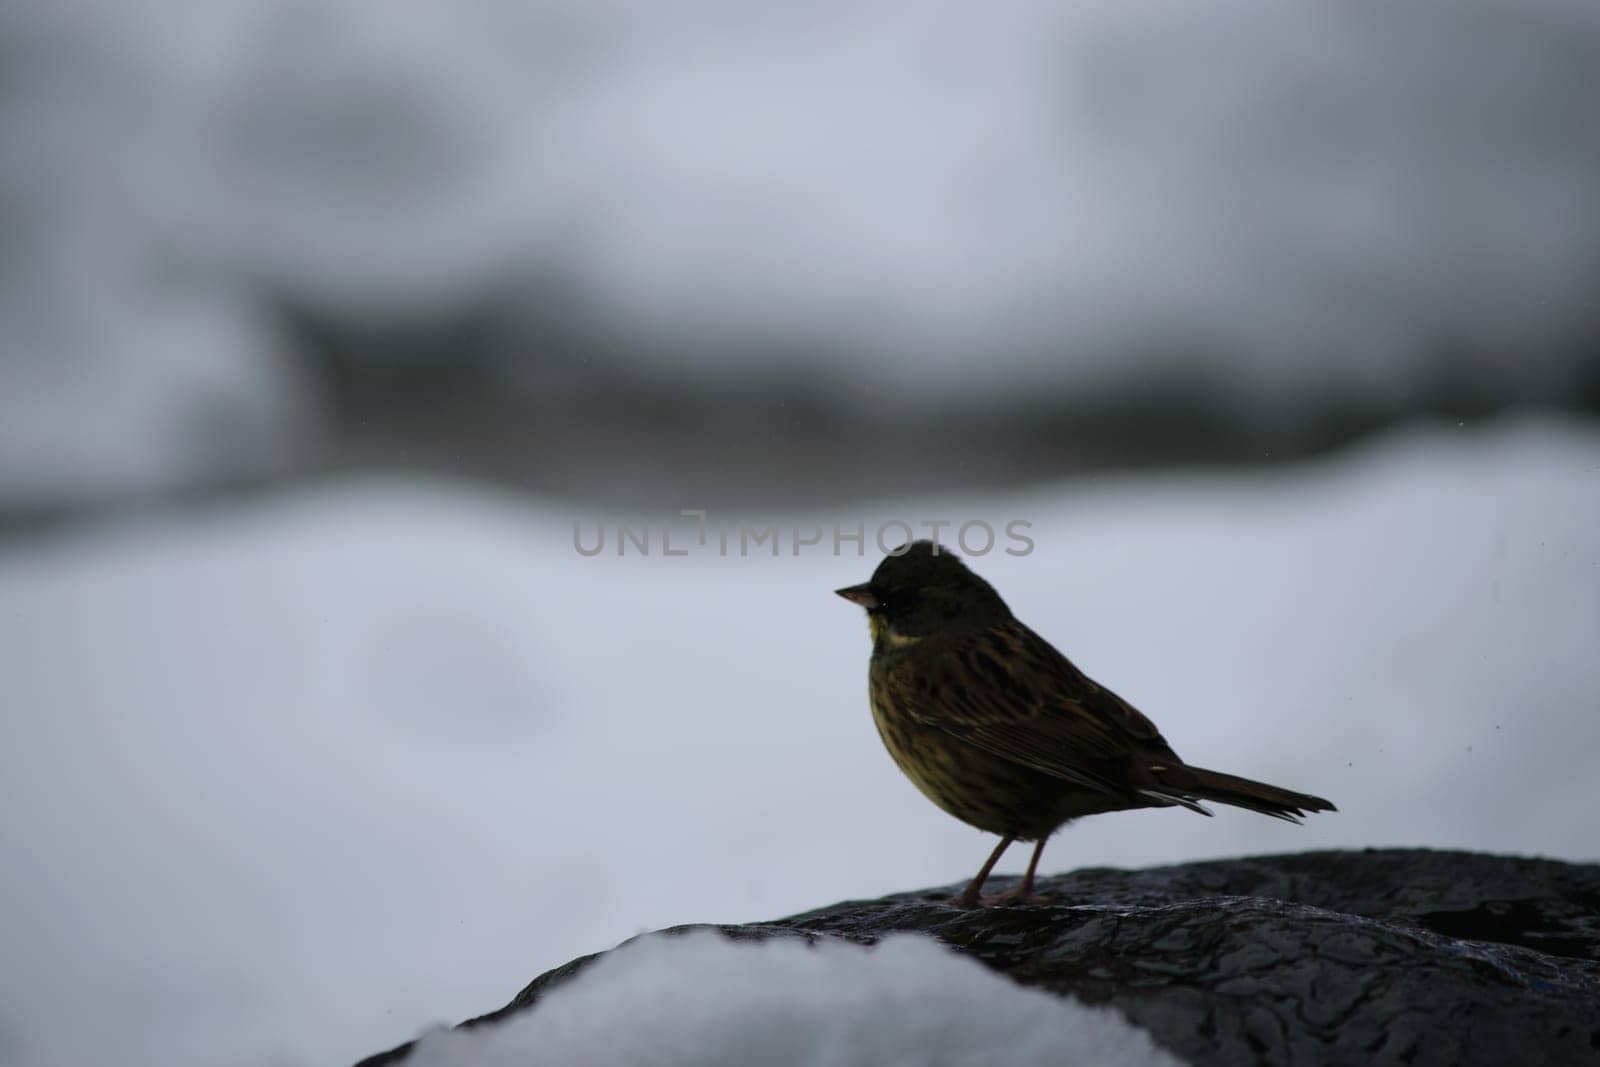 A green finch on an icy rock set against a white background.